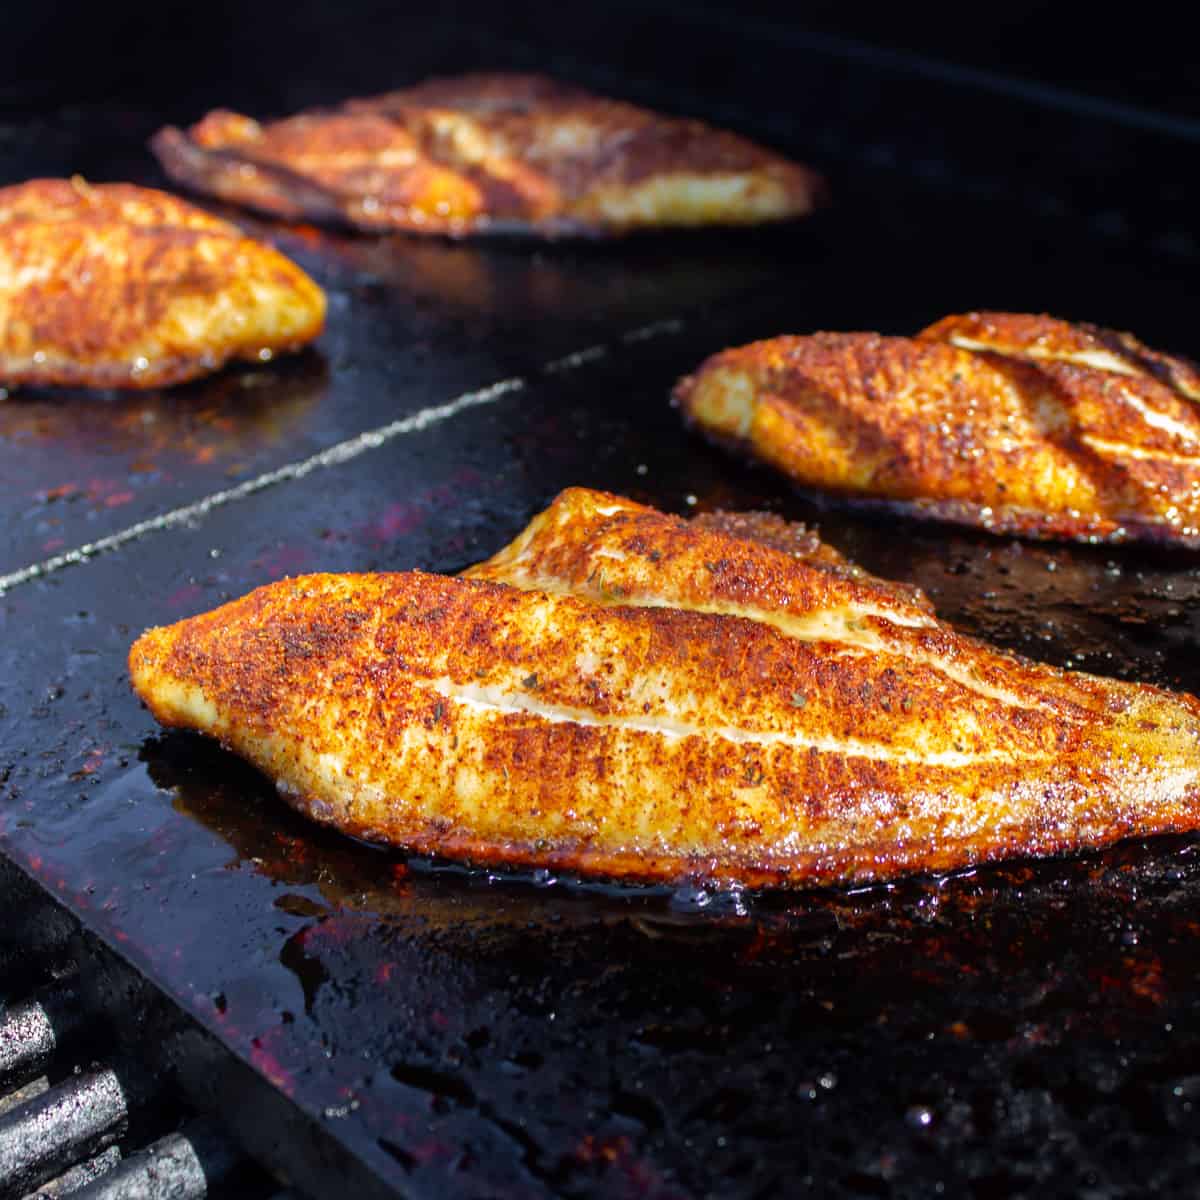 Fish that is finished cooking on the grill.